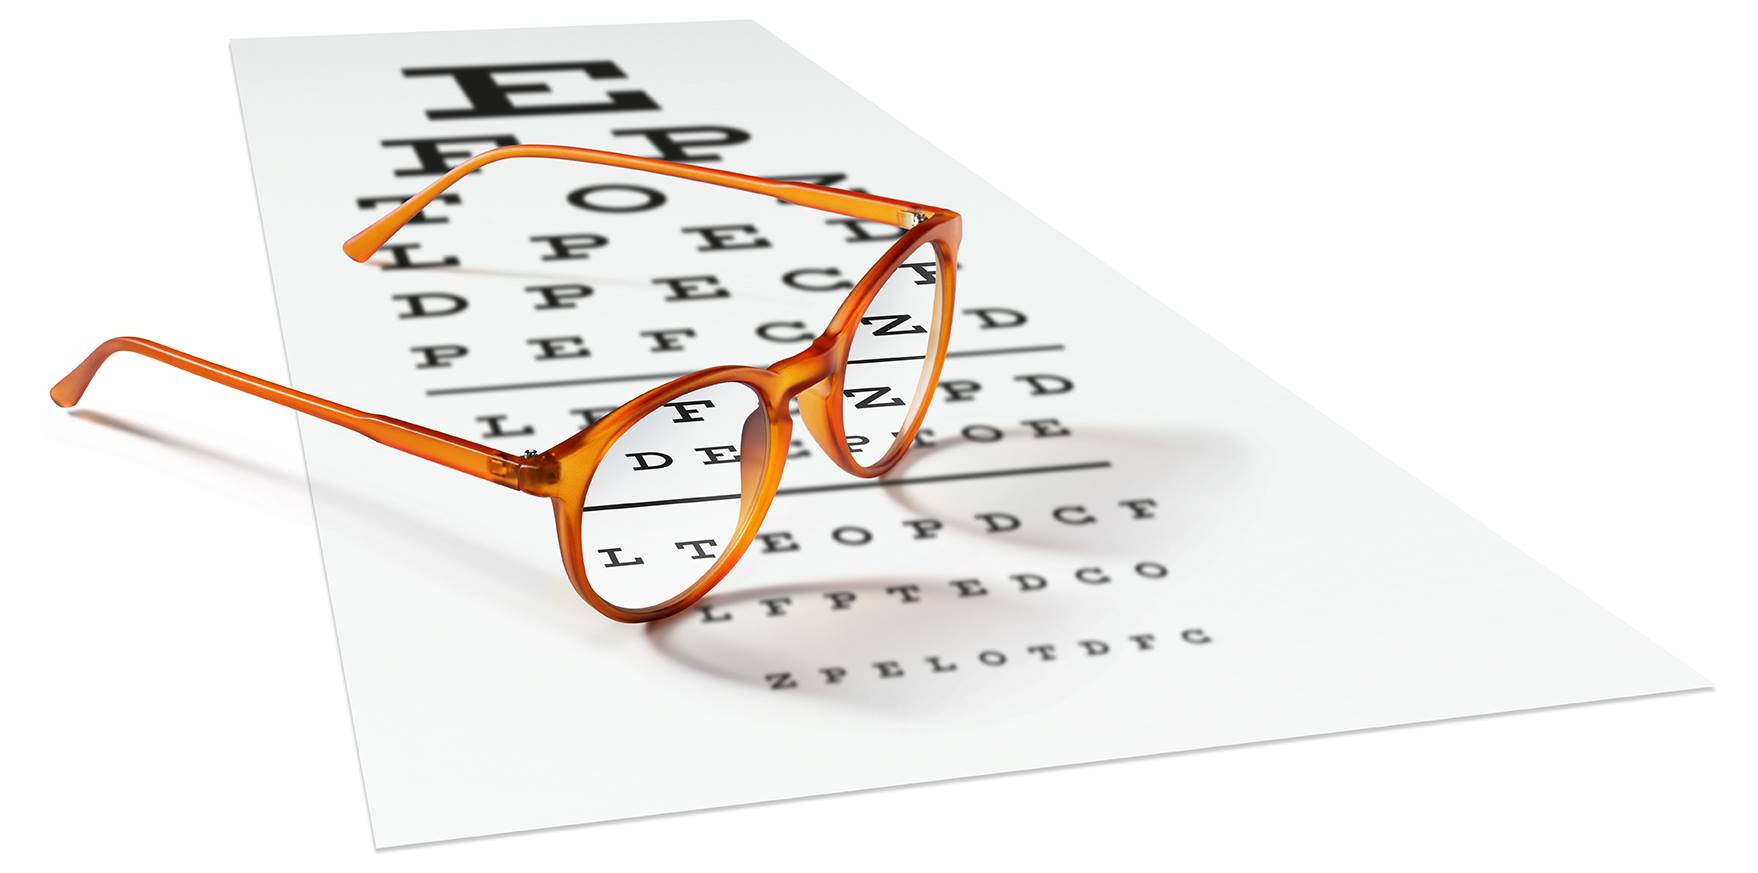 A pair of eyeglasses resting over an eye chart test